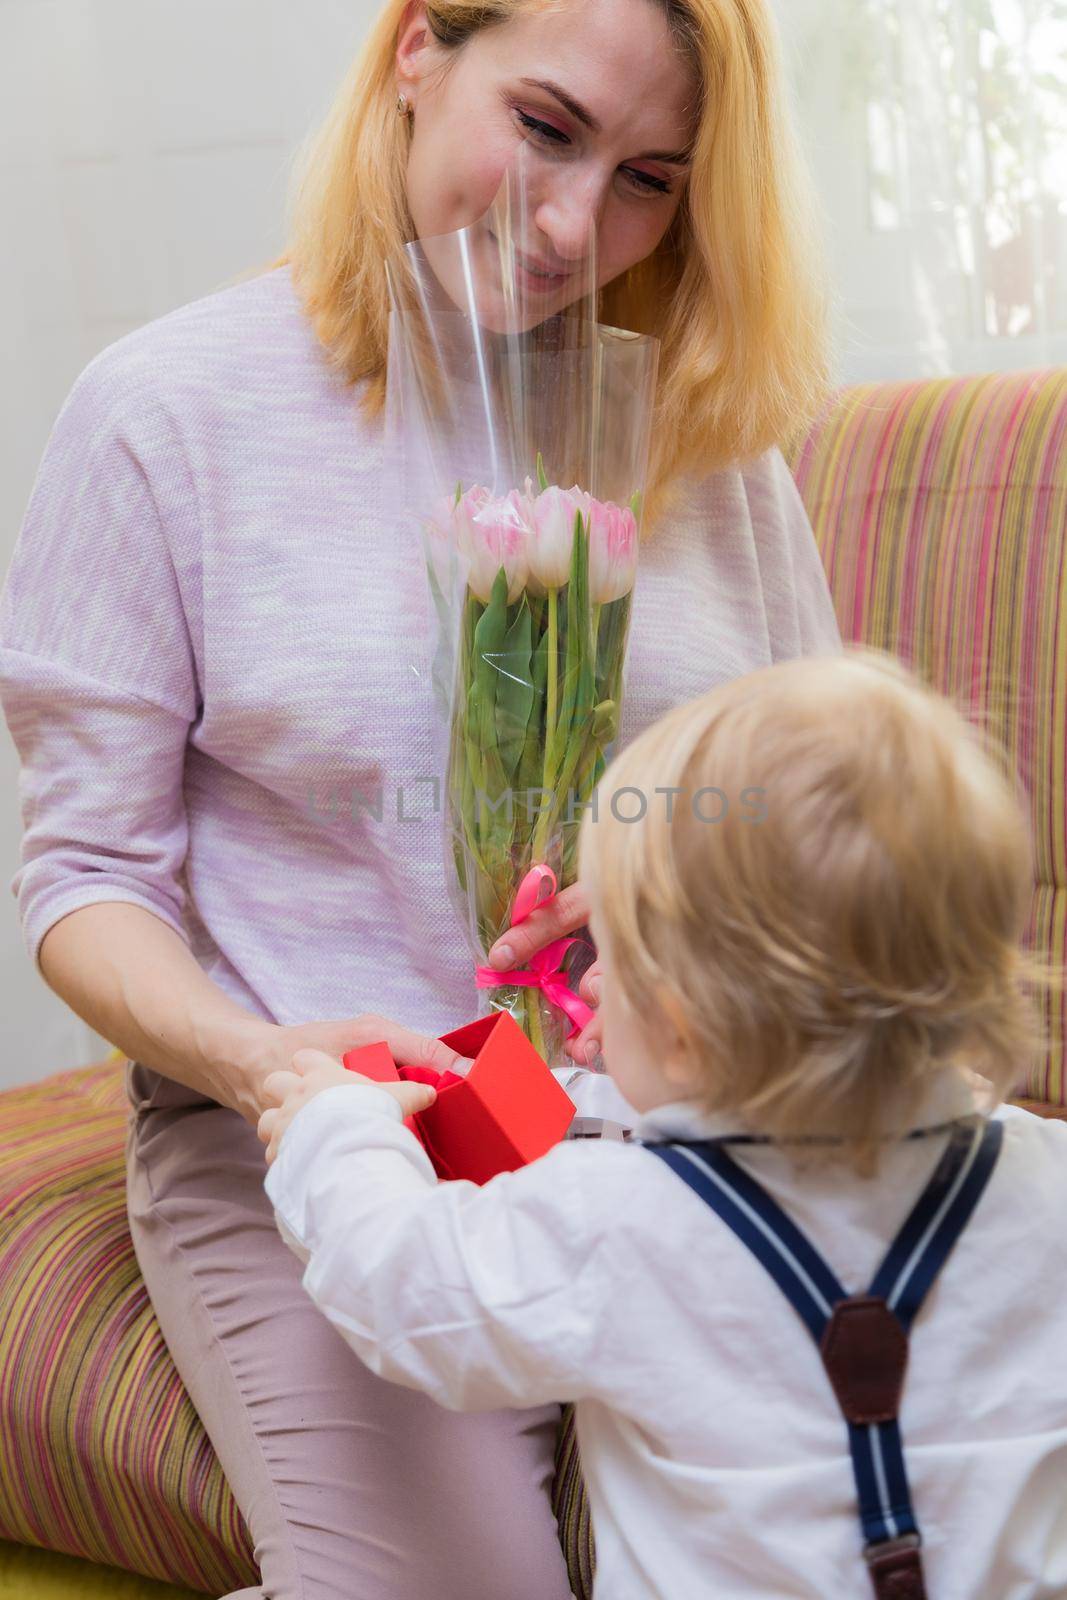 The kid congratulates his mother on the holiday, gives her flowers and a gift. by Yurich32